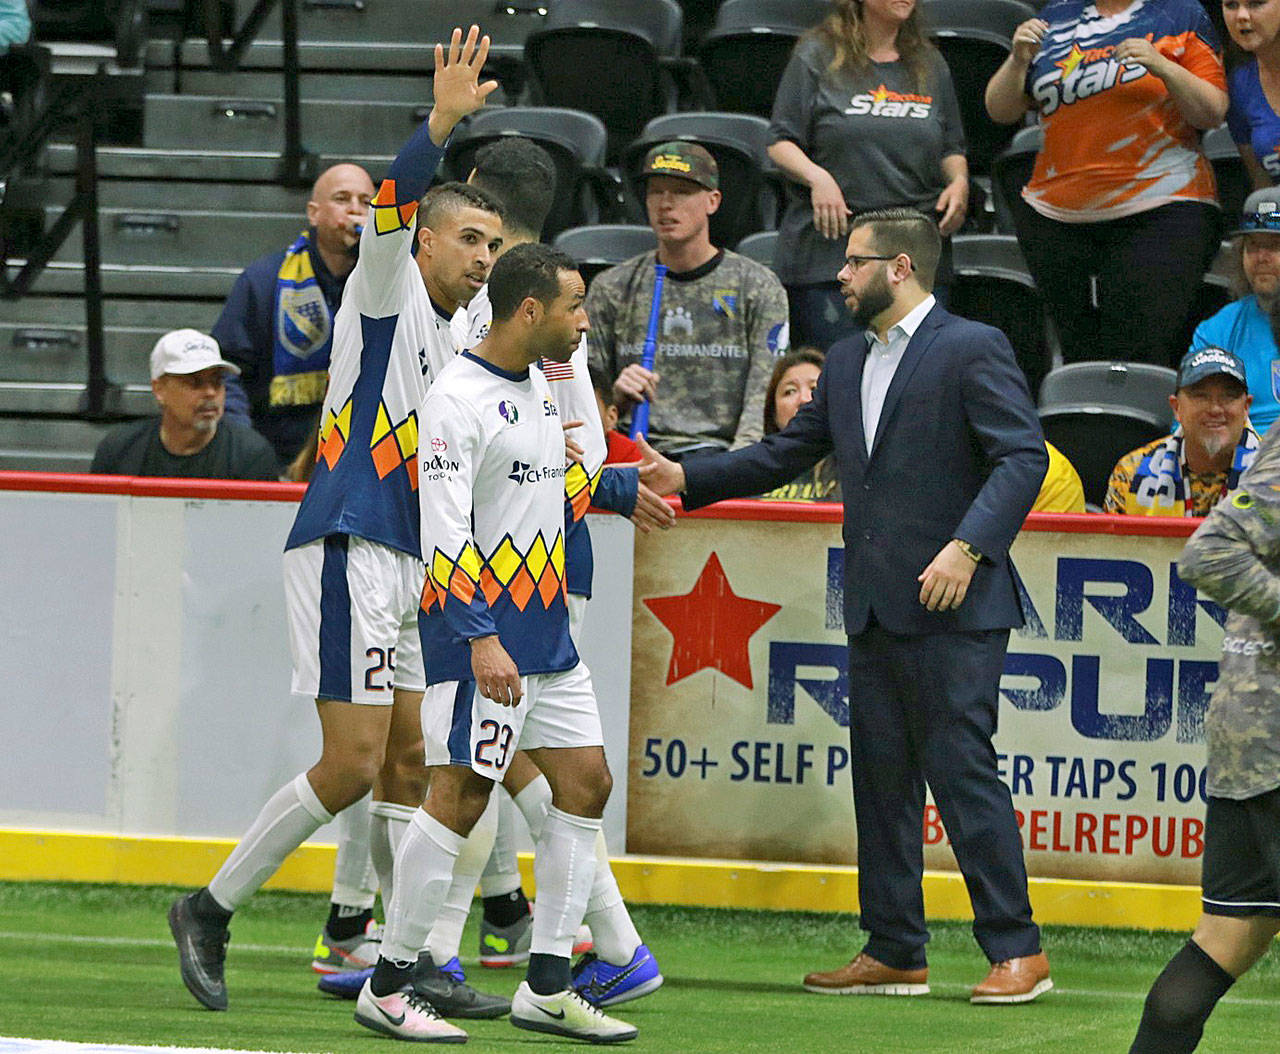 Stars coach Adam Becker congratulates Mike Ramos on his second quarter goal during Tacoma’s 6-2 loss in San Diego on Sunday. COURTESY PHOTO, MASL Media/San Diego Sockers